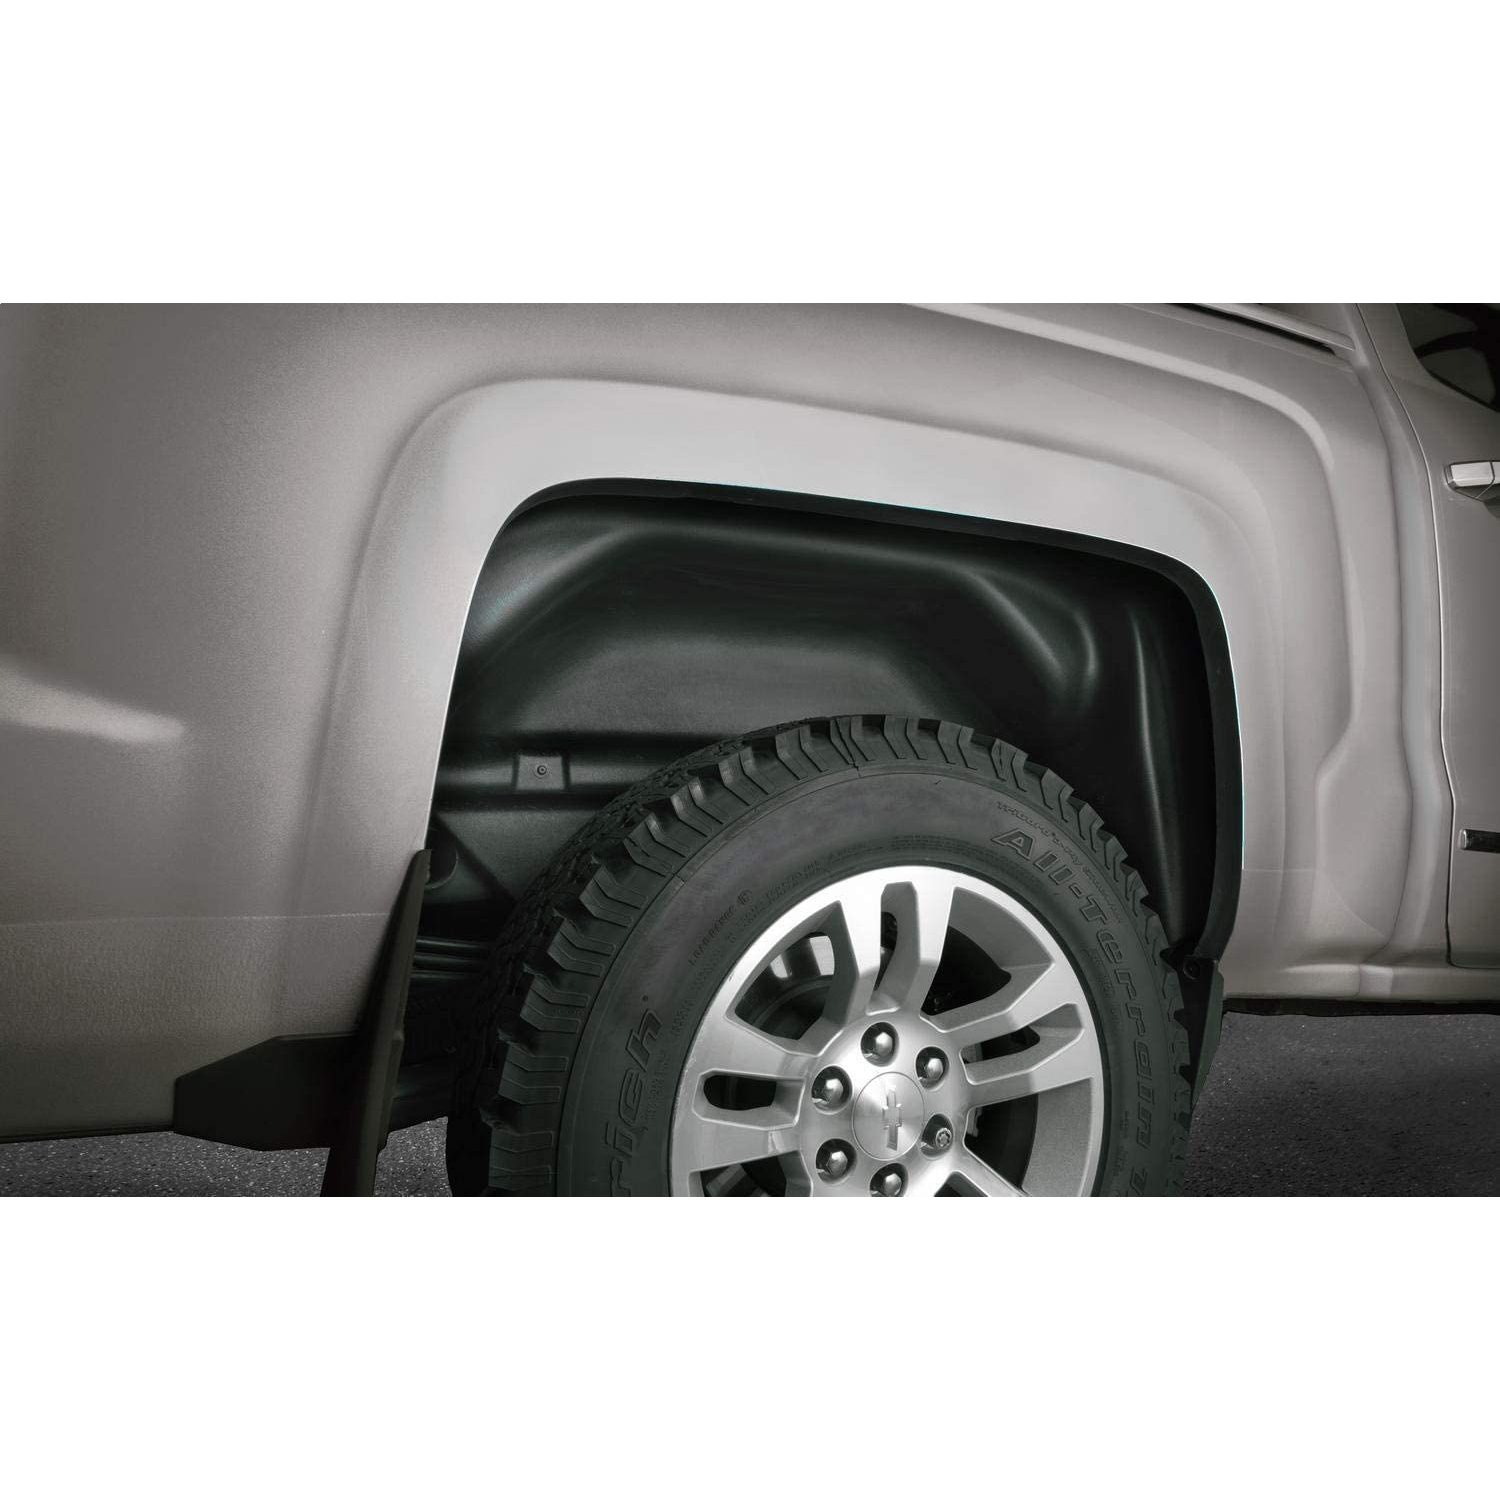 Husky Liners 79061 Rear Wheel Well Guards for 2019 2020 Chevrolet Silverado 1500 753933790615 | eBay 2020 Silverado 2500 Rear Wheel Well Liners